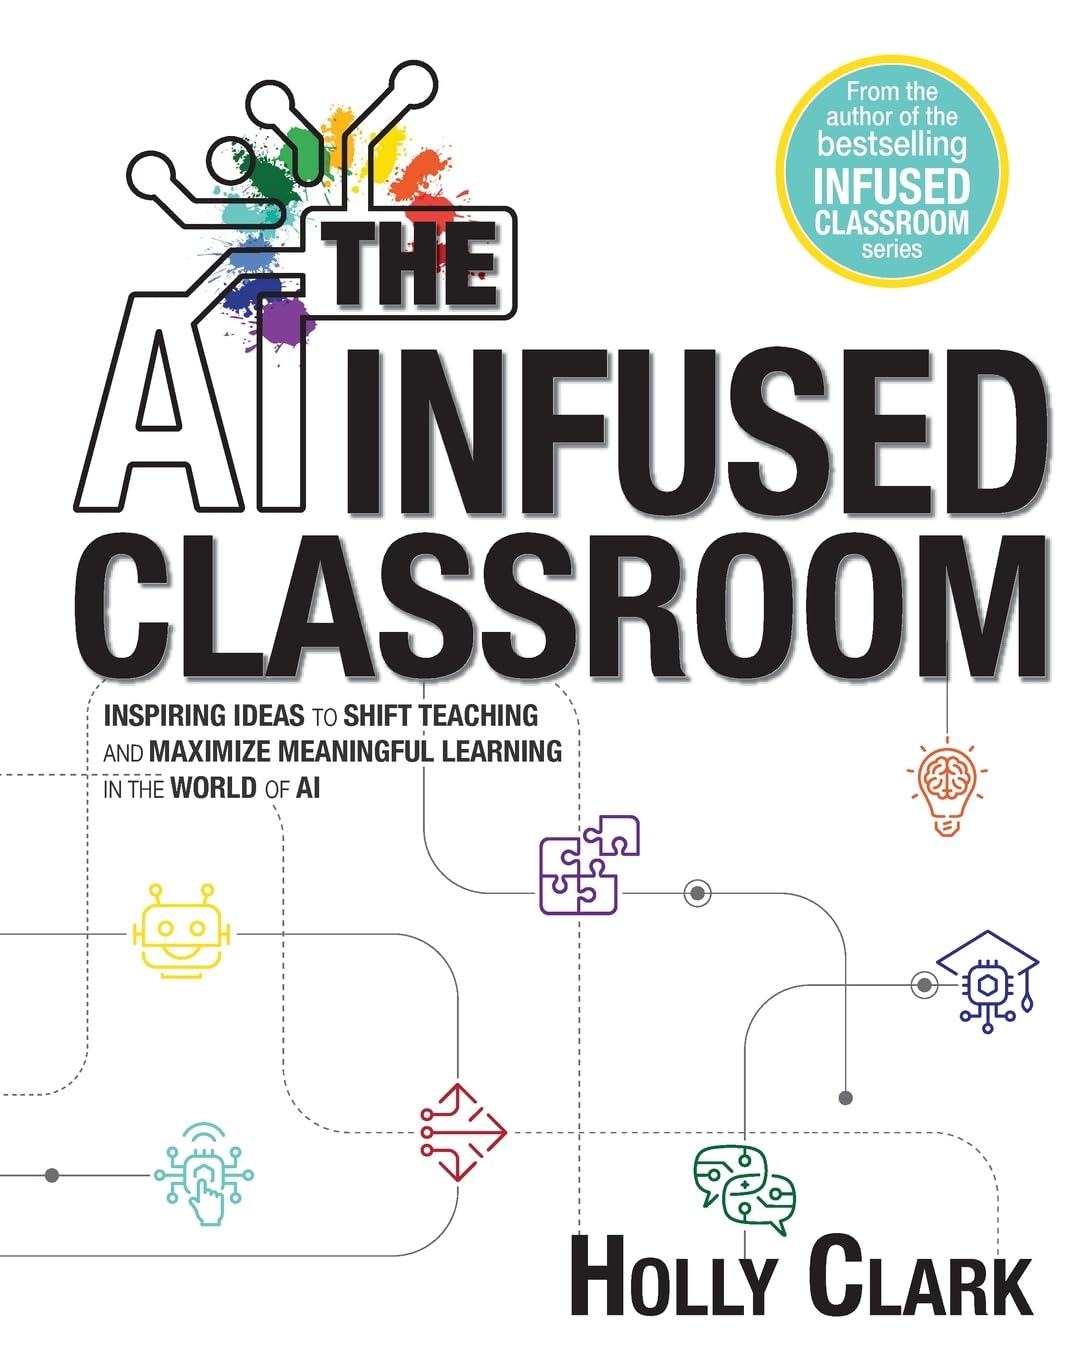 Image The AI infused classroom : inspiring ideas to shift teaching and maximize meaningful learning in the world of AI